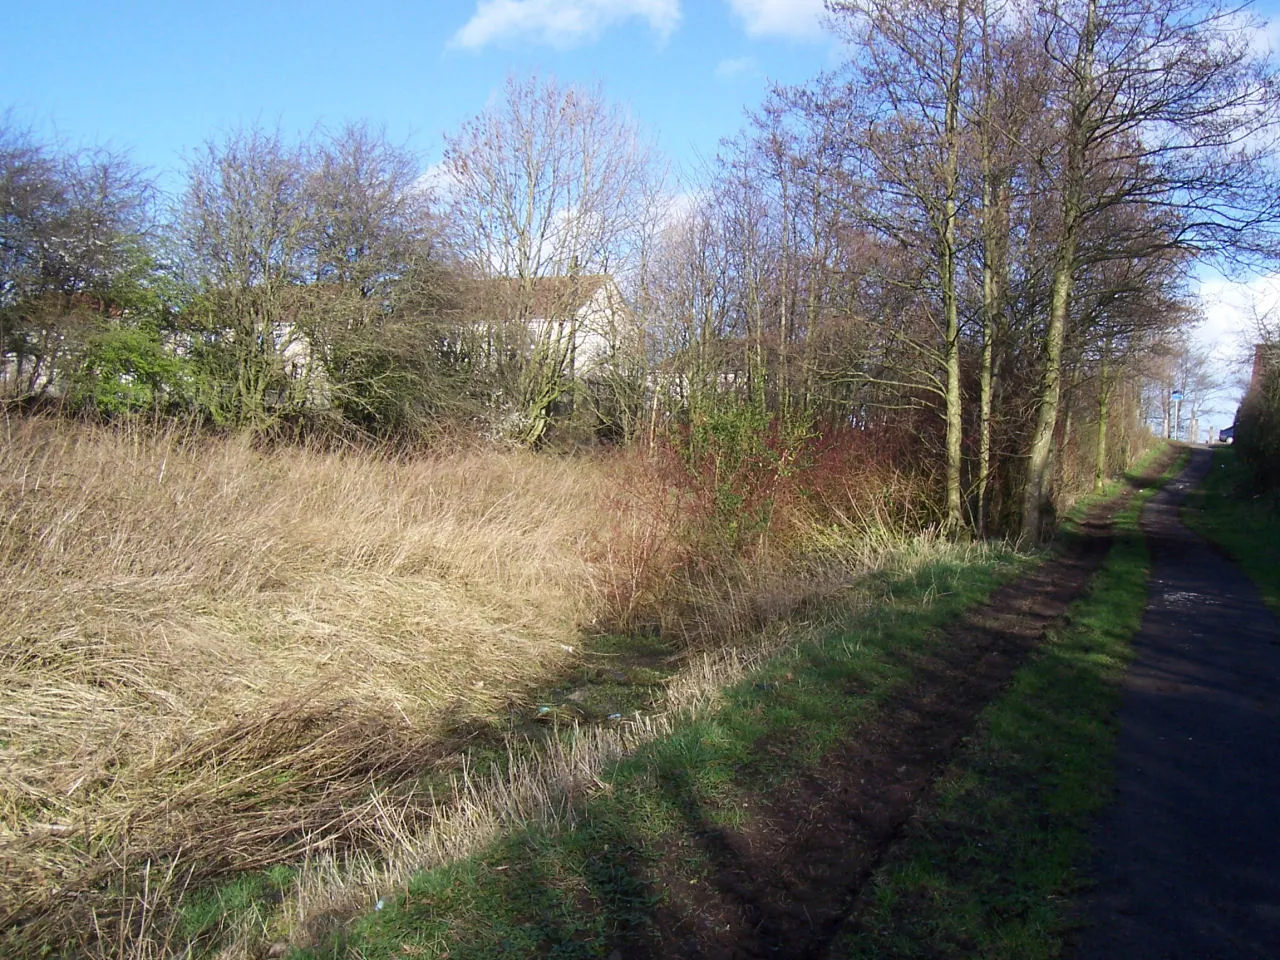 Photo showing: The site of Springside railway station in March 2007. The trackbed is now part of National Cycle Network 73 running from Irvine to Kilmarnock. Photo by Dreamer84.